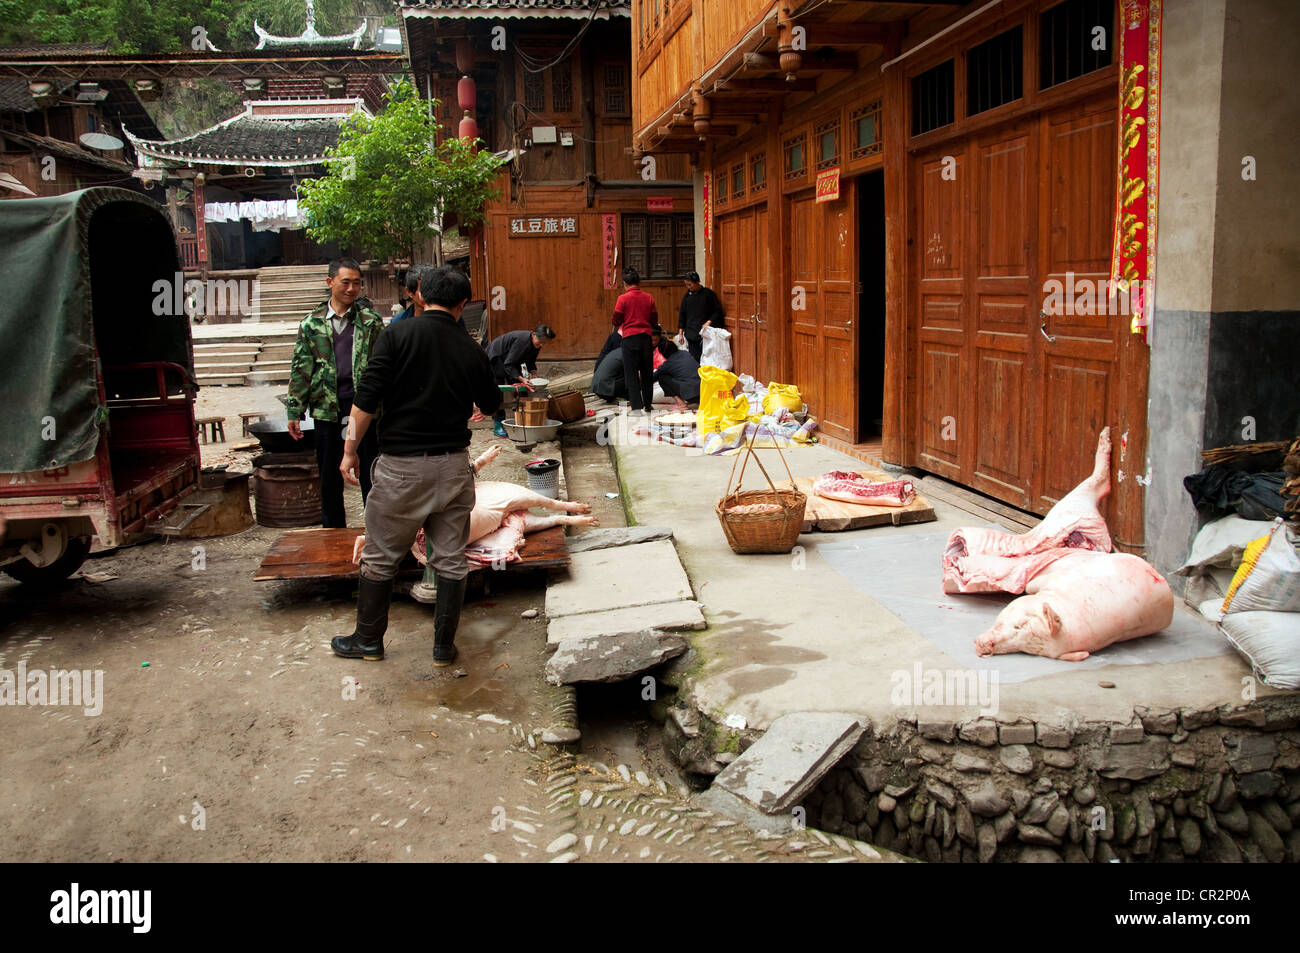 Slaughtering a pig in front of a traditional Dong wooden house, Zhaoxing Dong Village, Southern China Stock Photo